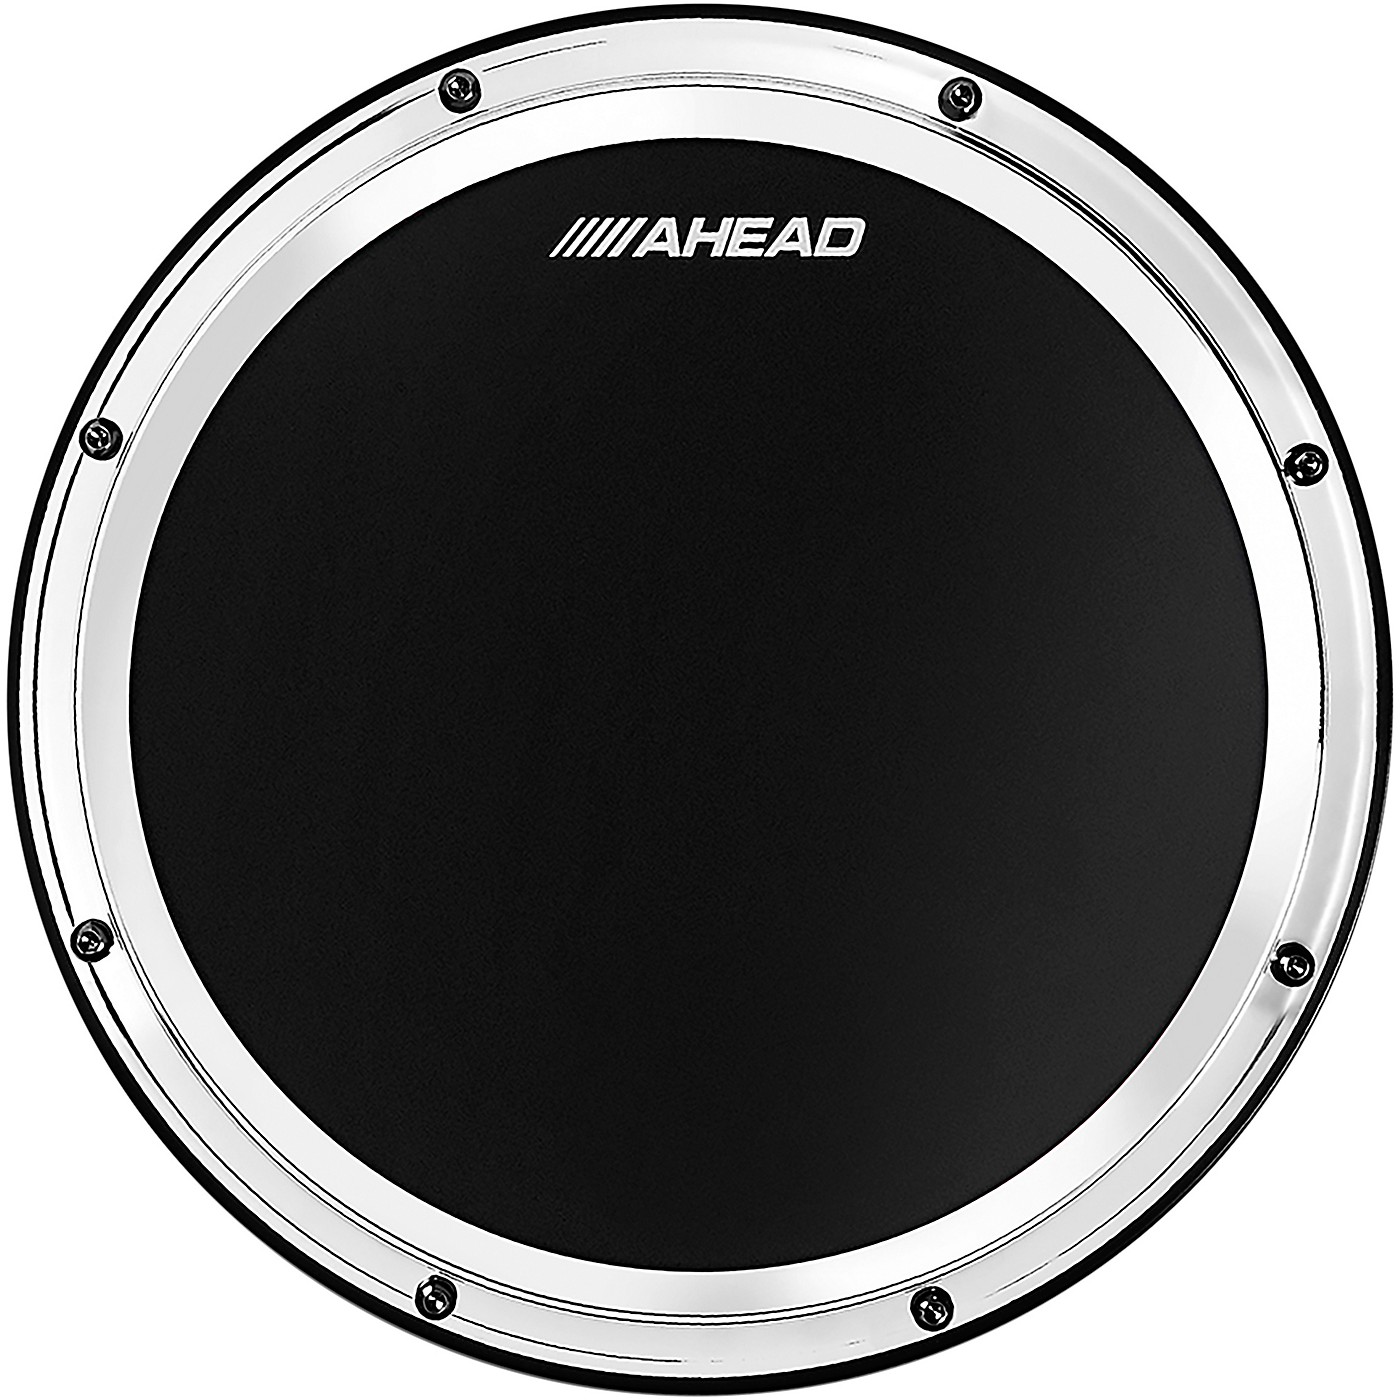 Ahead 10 in. S-Hoop Pad with Snare Sound thumbnail